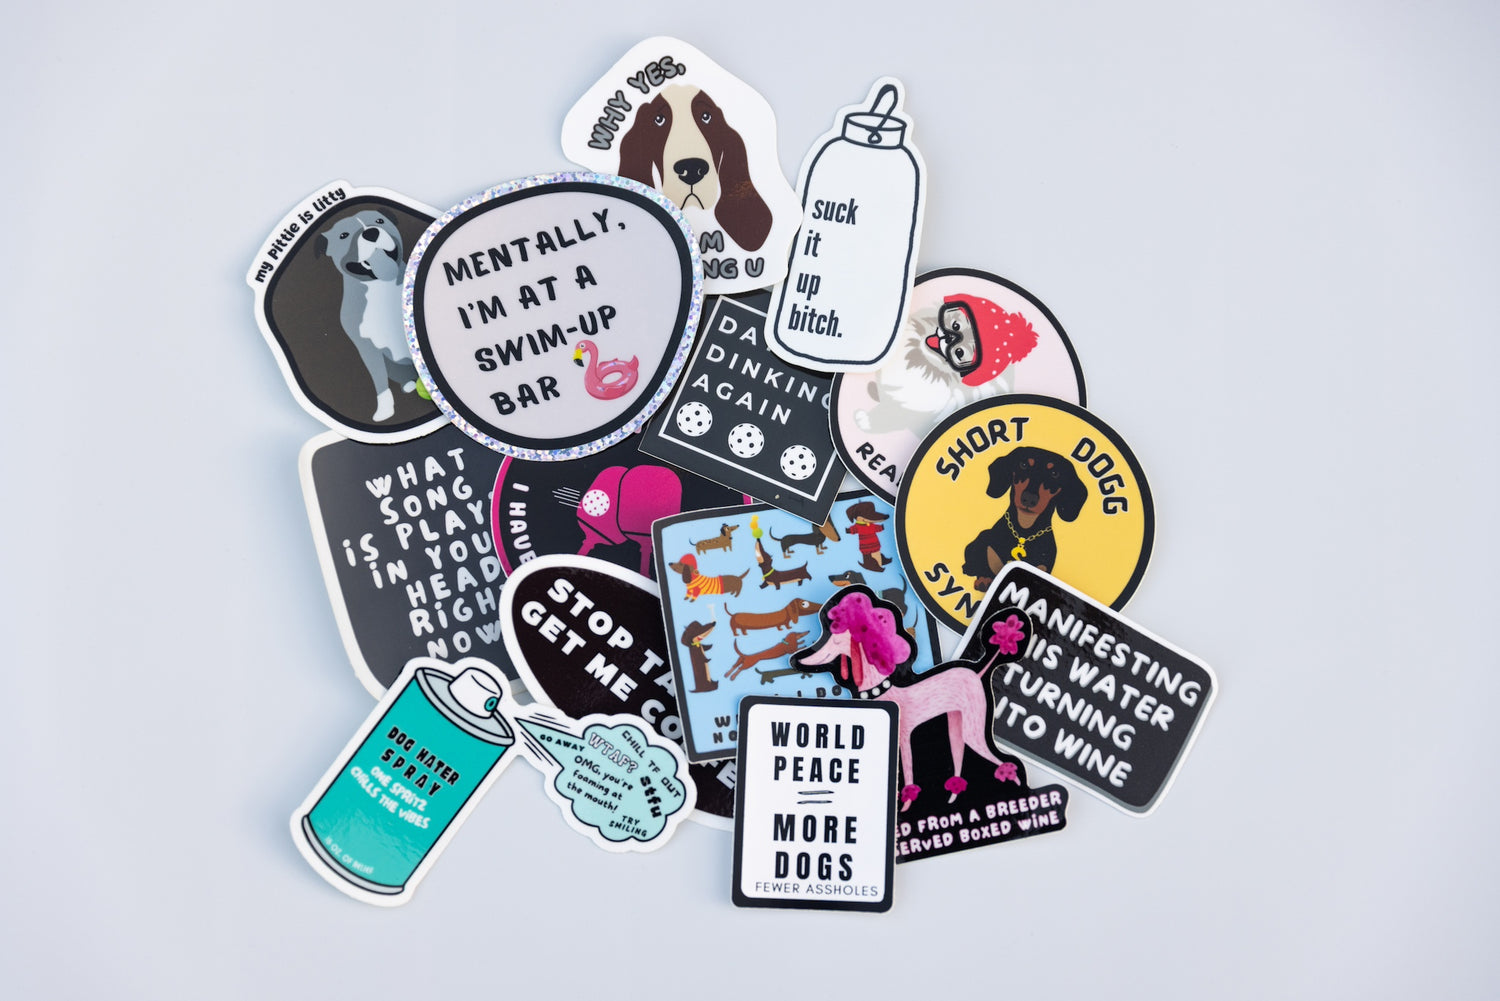 Fun Vinyl Stickers: "These stickers are freaking hilarious!"